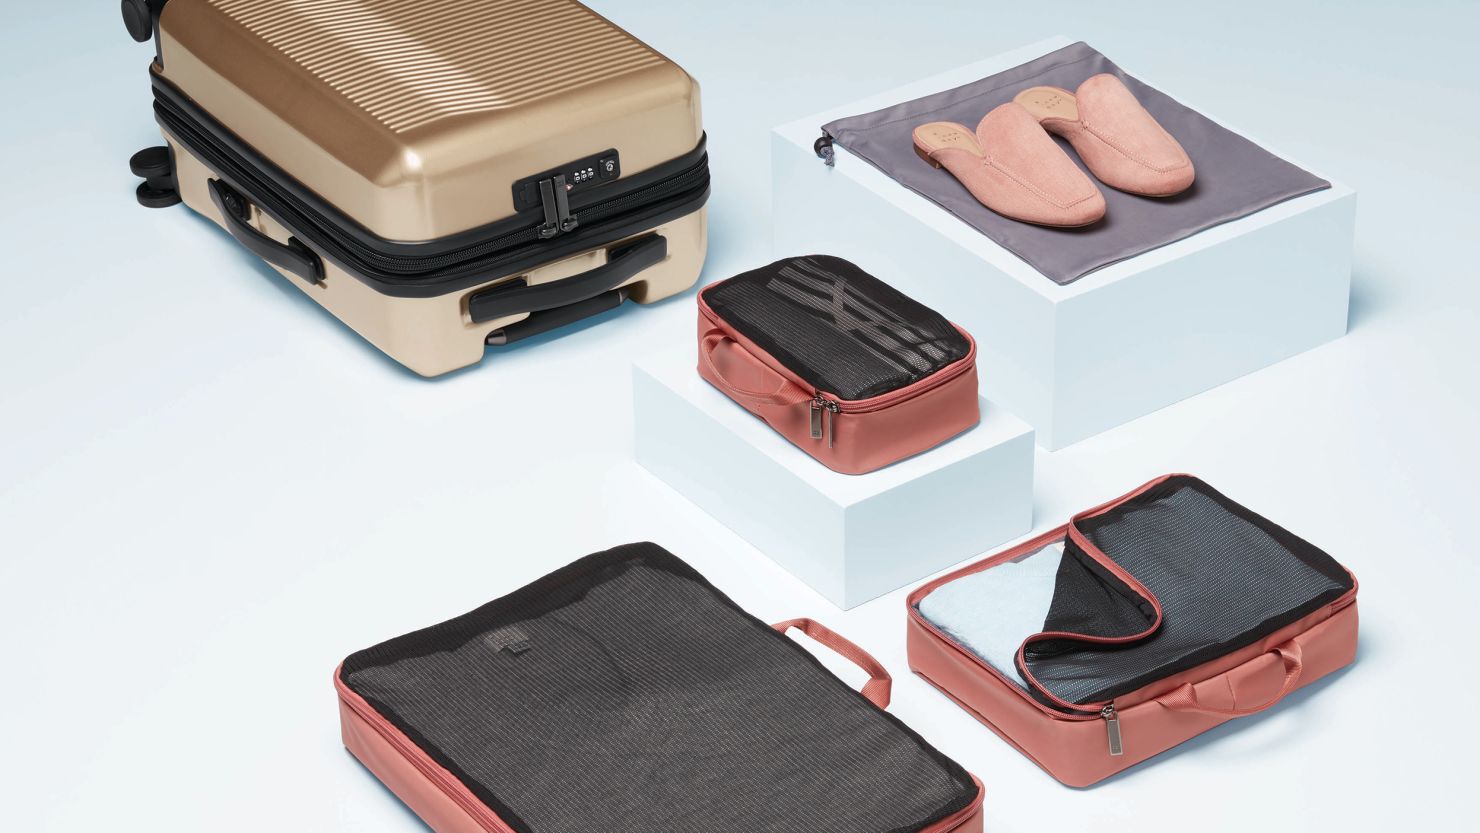 Target Open Story: Target's New Luggage Brand Has All Your Travel Needs